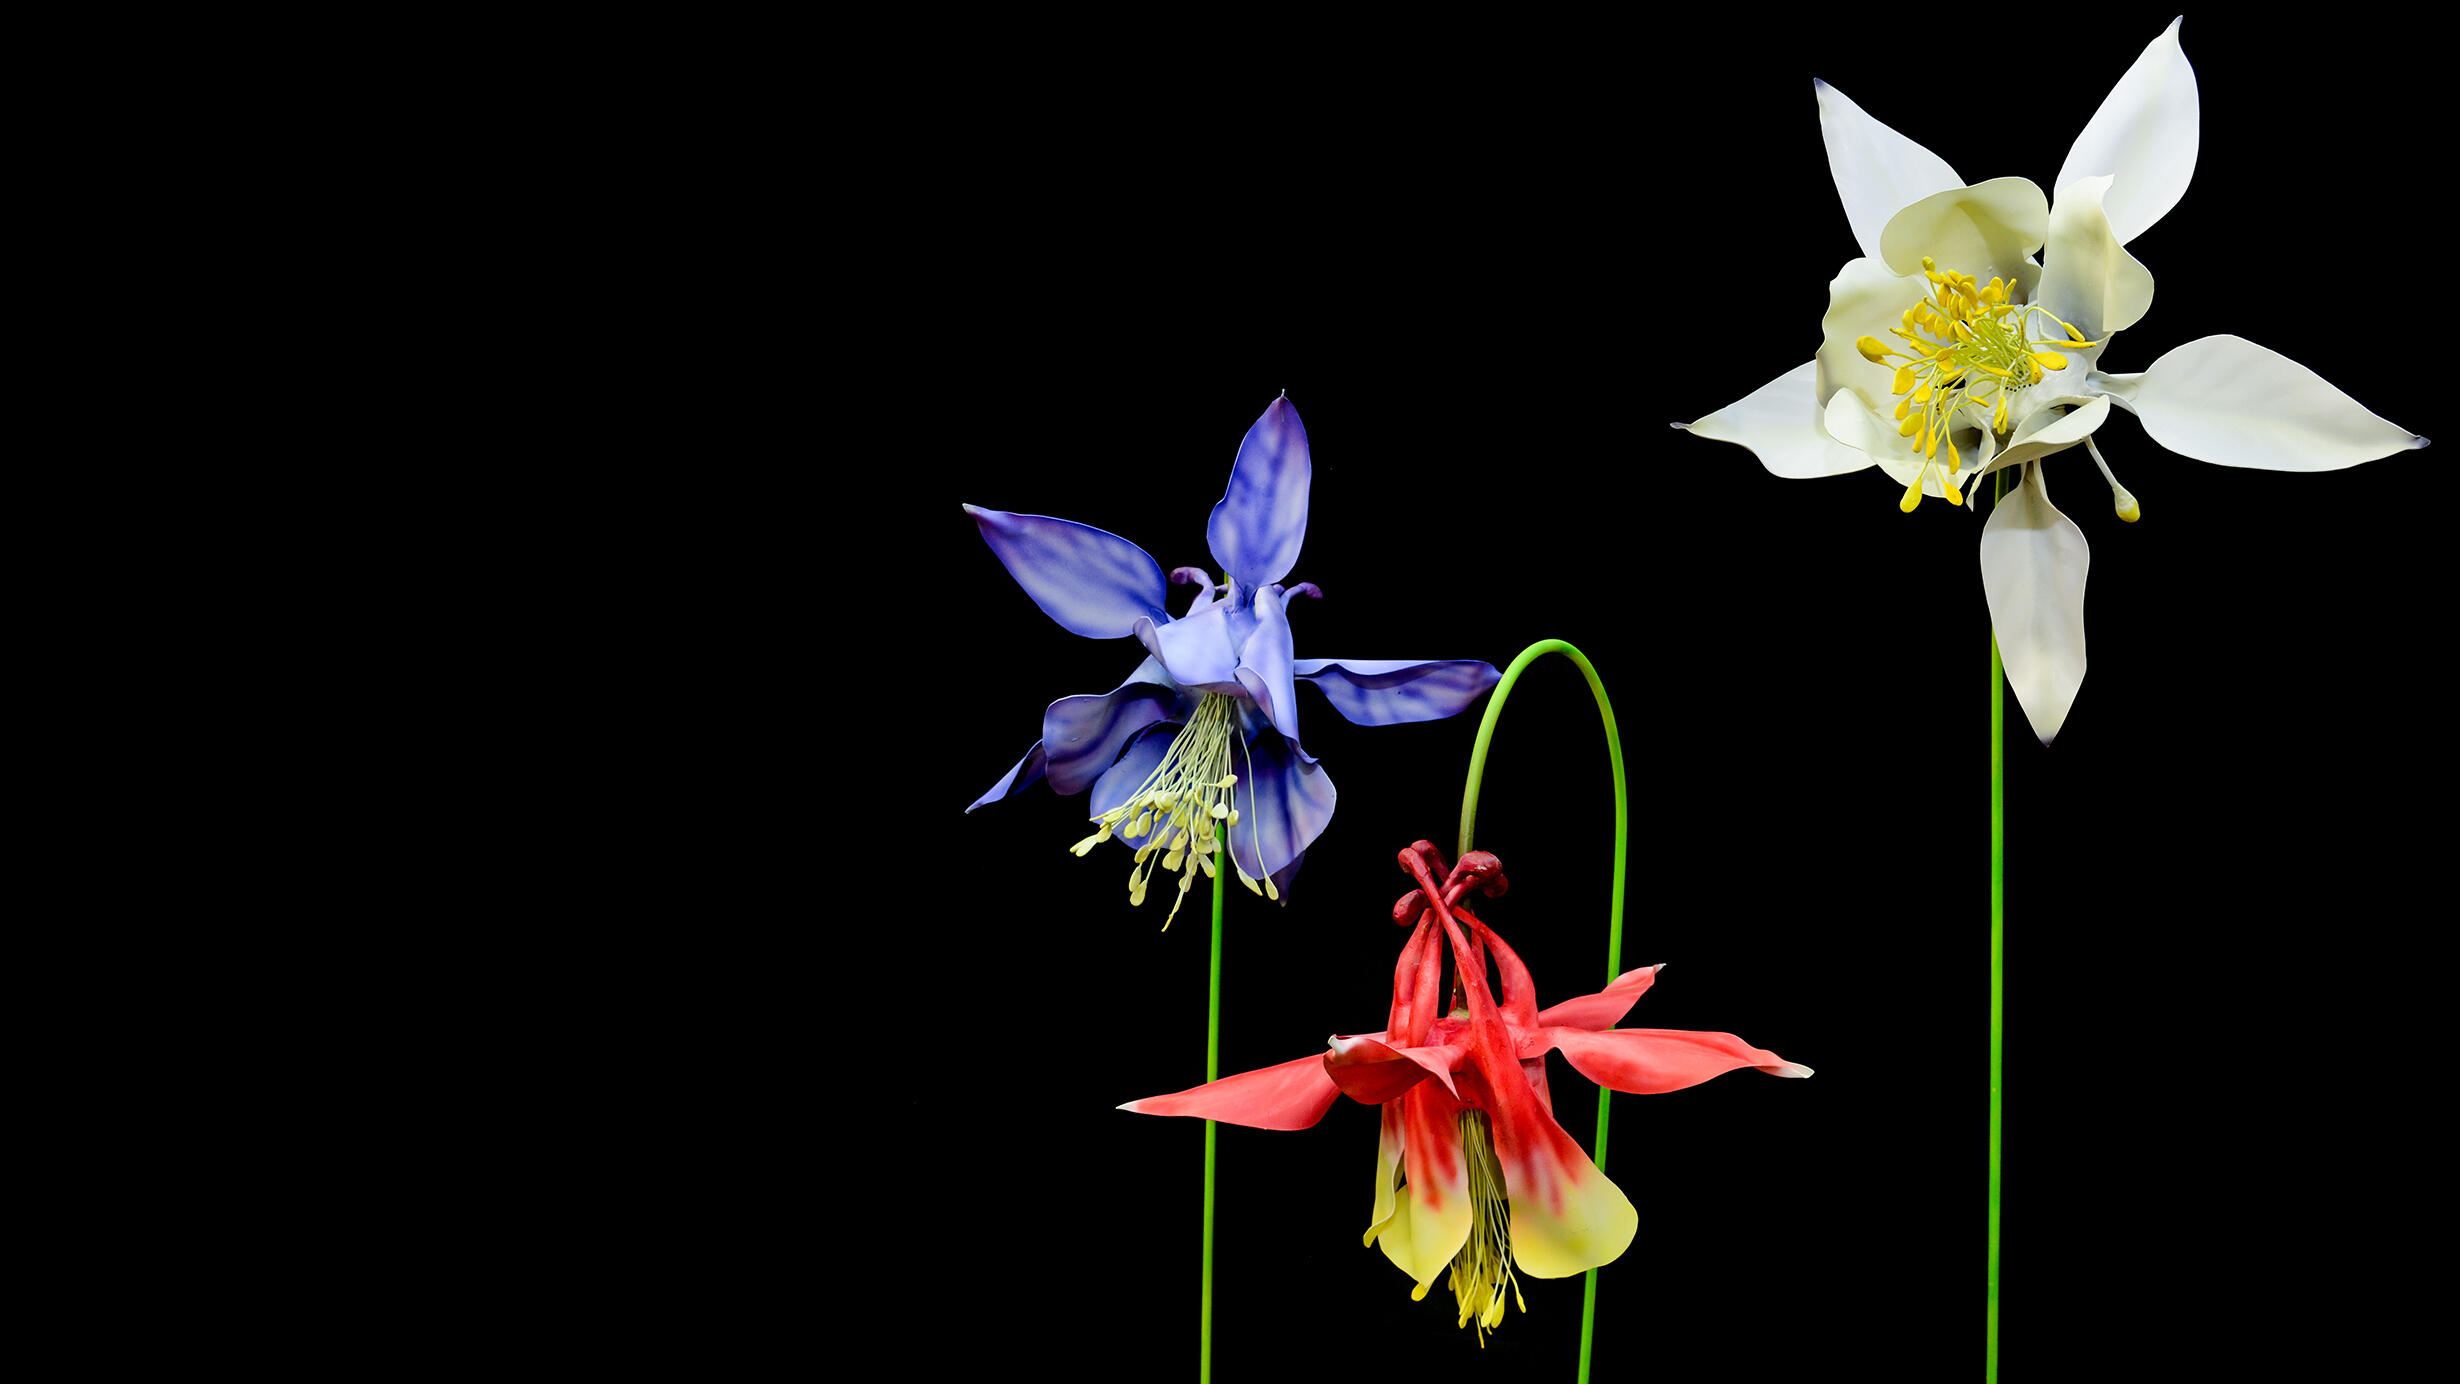 Three models of columbine flowers, one blue, one red, and one white, against a solid black background